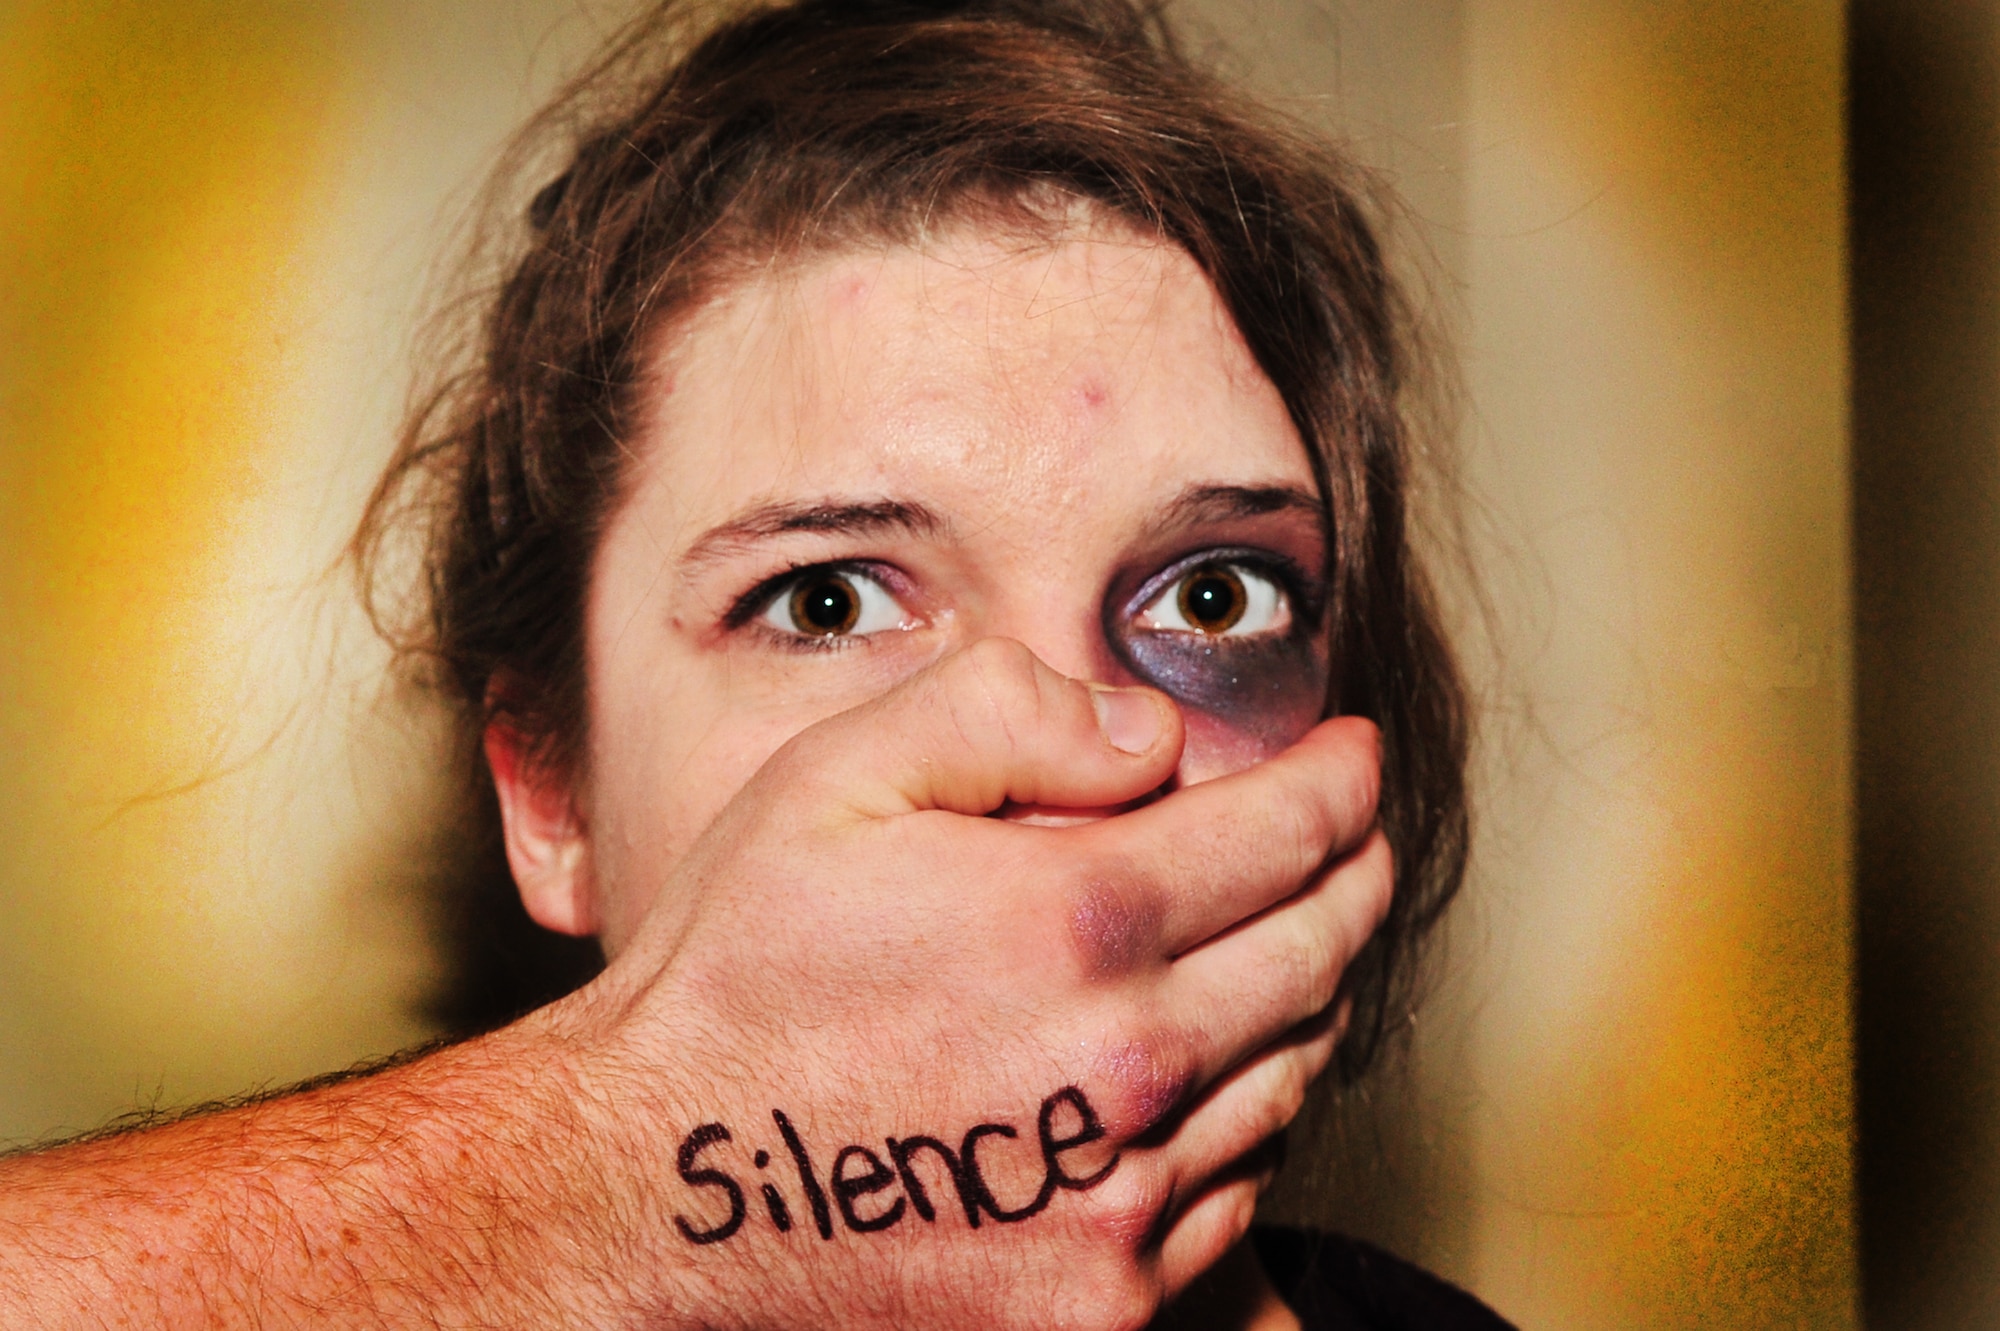 U.S. Air Force Airman Jodi Lange, 20th Medical Support Squadron, poses for an illustration photo depicting an abused woman silenced by her abuser as a result of sexual assault, Shaw Air Force Base, S.C. March 25, 2012. Studies show that men, women and children of all ages, races, religions, and economic classes can be and have been victims of sexual assault. (U.S. Air Force photo illustration by Airman 1st Class Ashley L. Gardner/ Released)